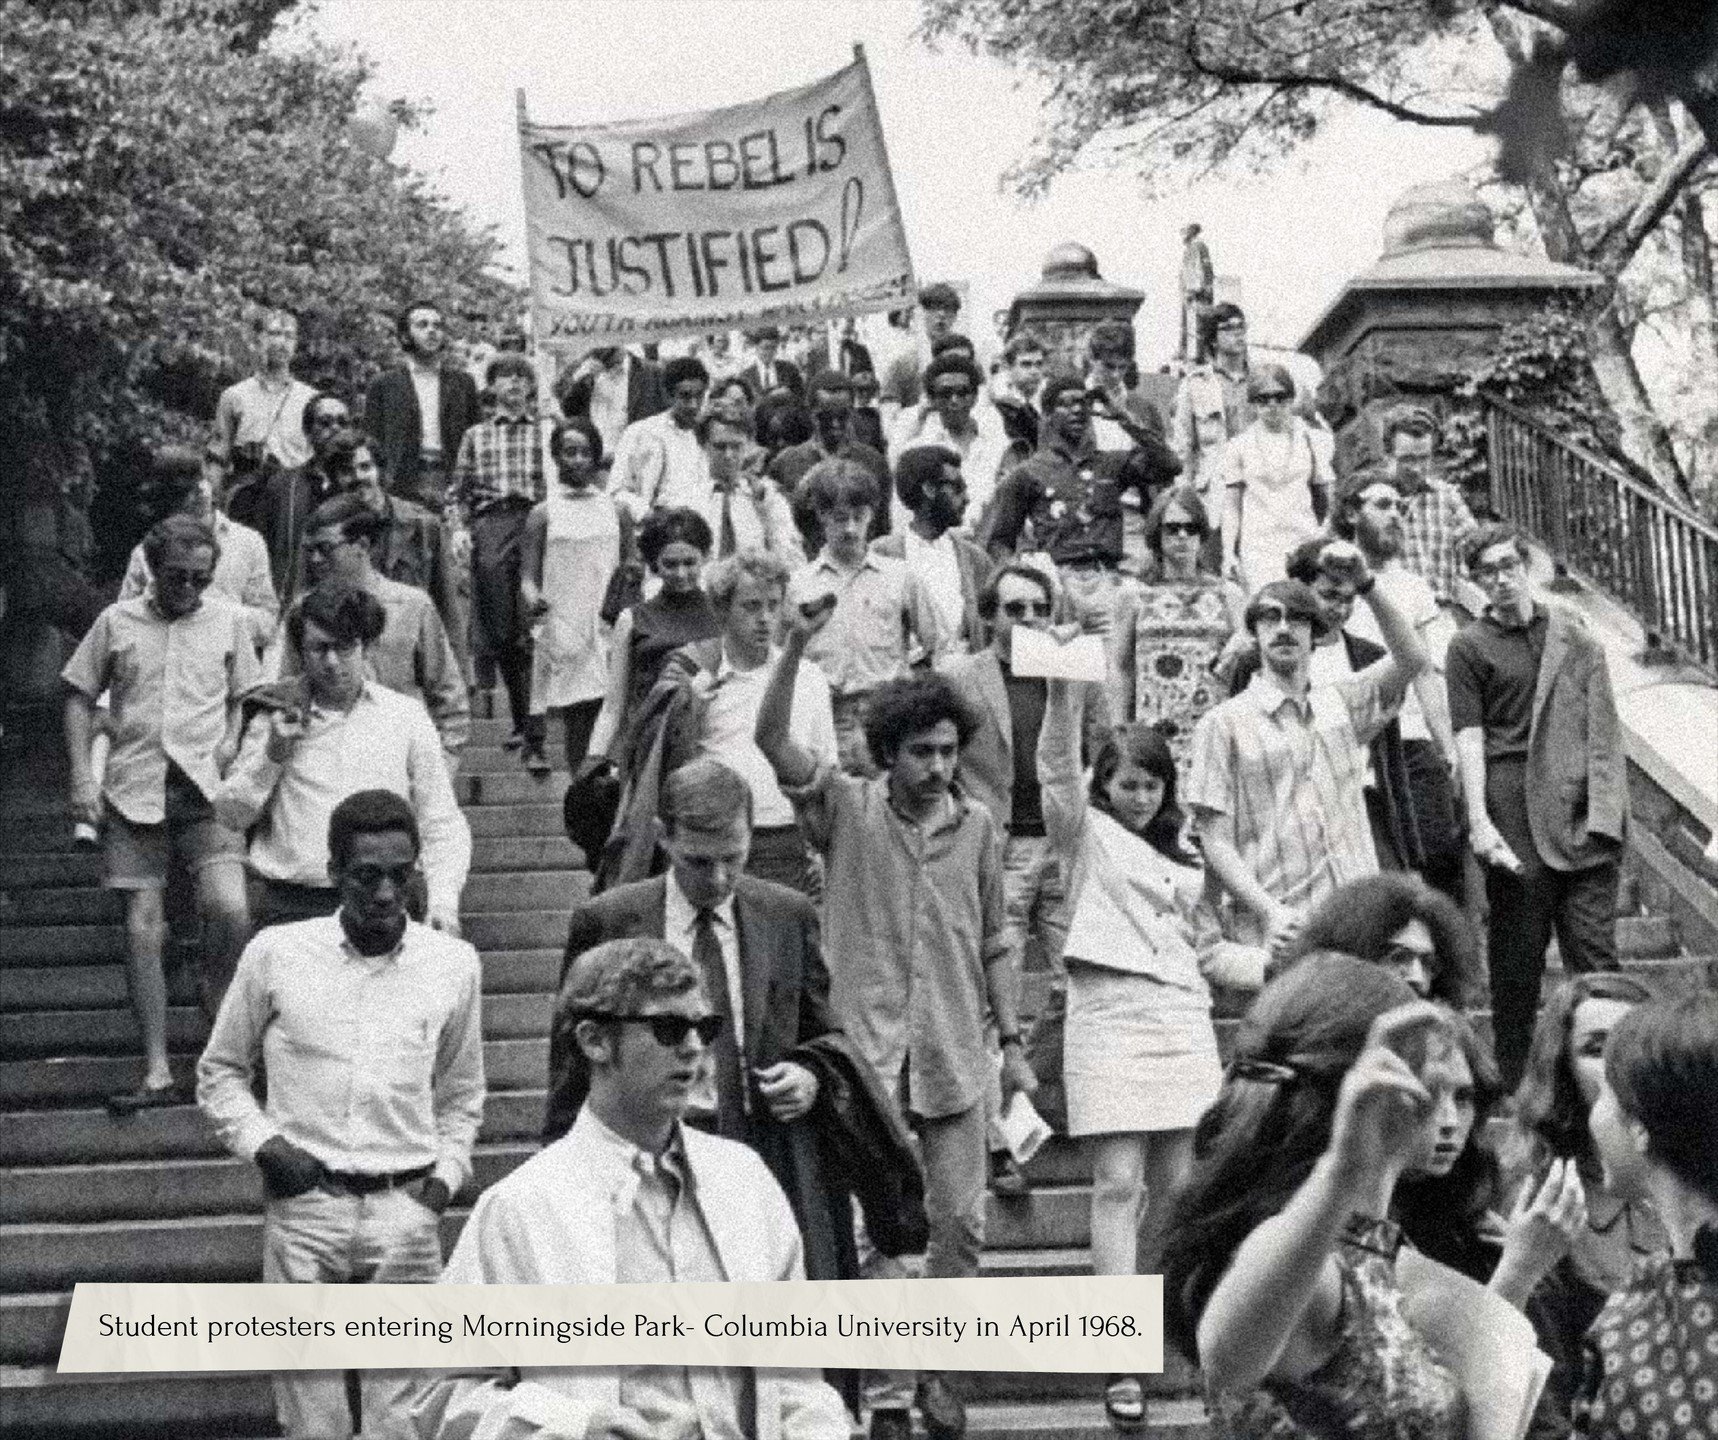 Free speech in the form of protests has always been an integral part of US history.

As students engage in protests on college campuses accross the nation we&rsquo;re reminded of similar moments in history that have helped shift perspectives, politic